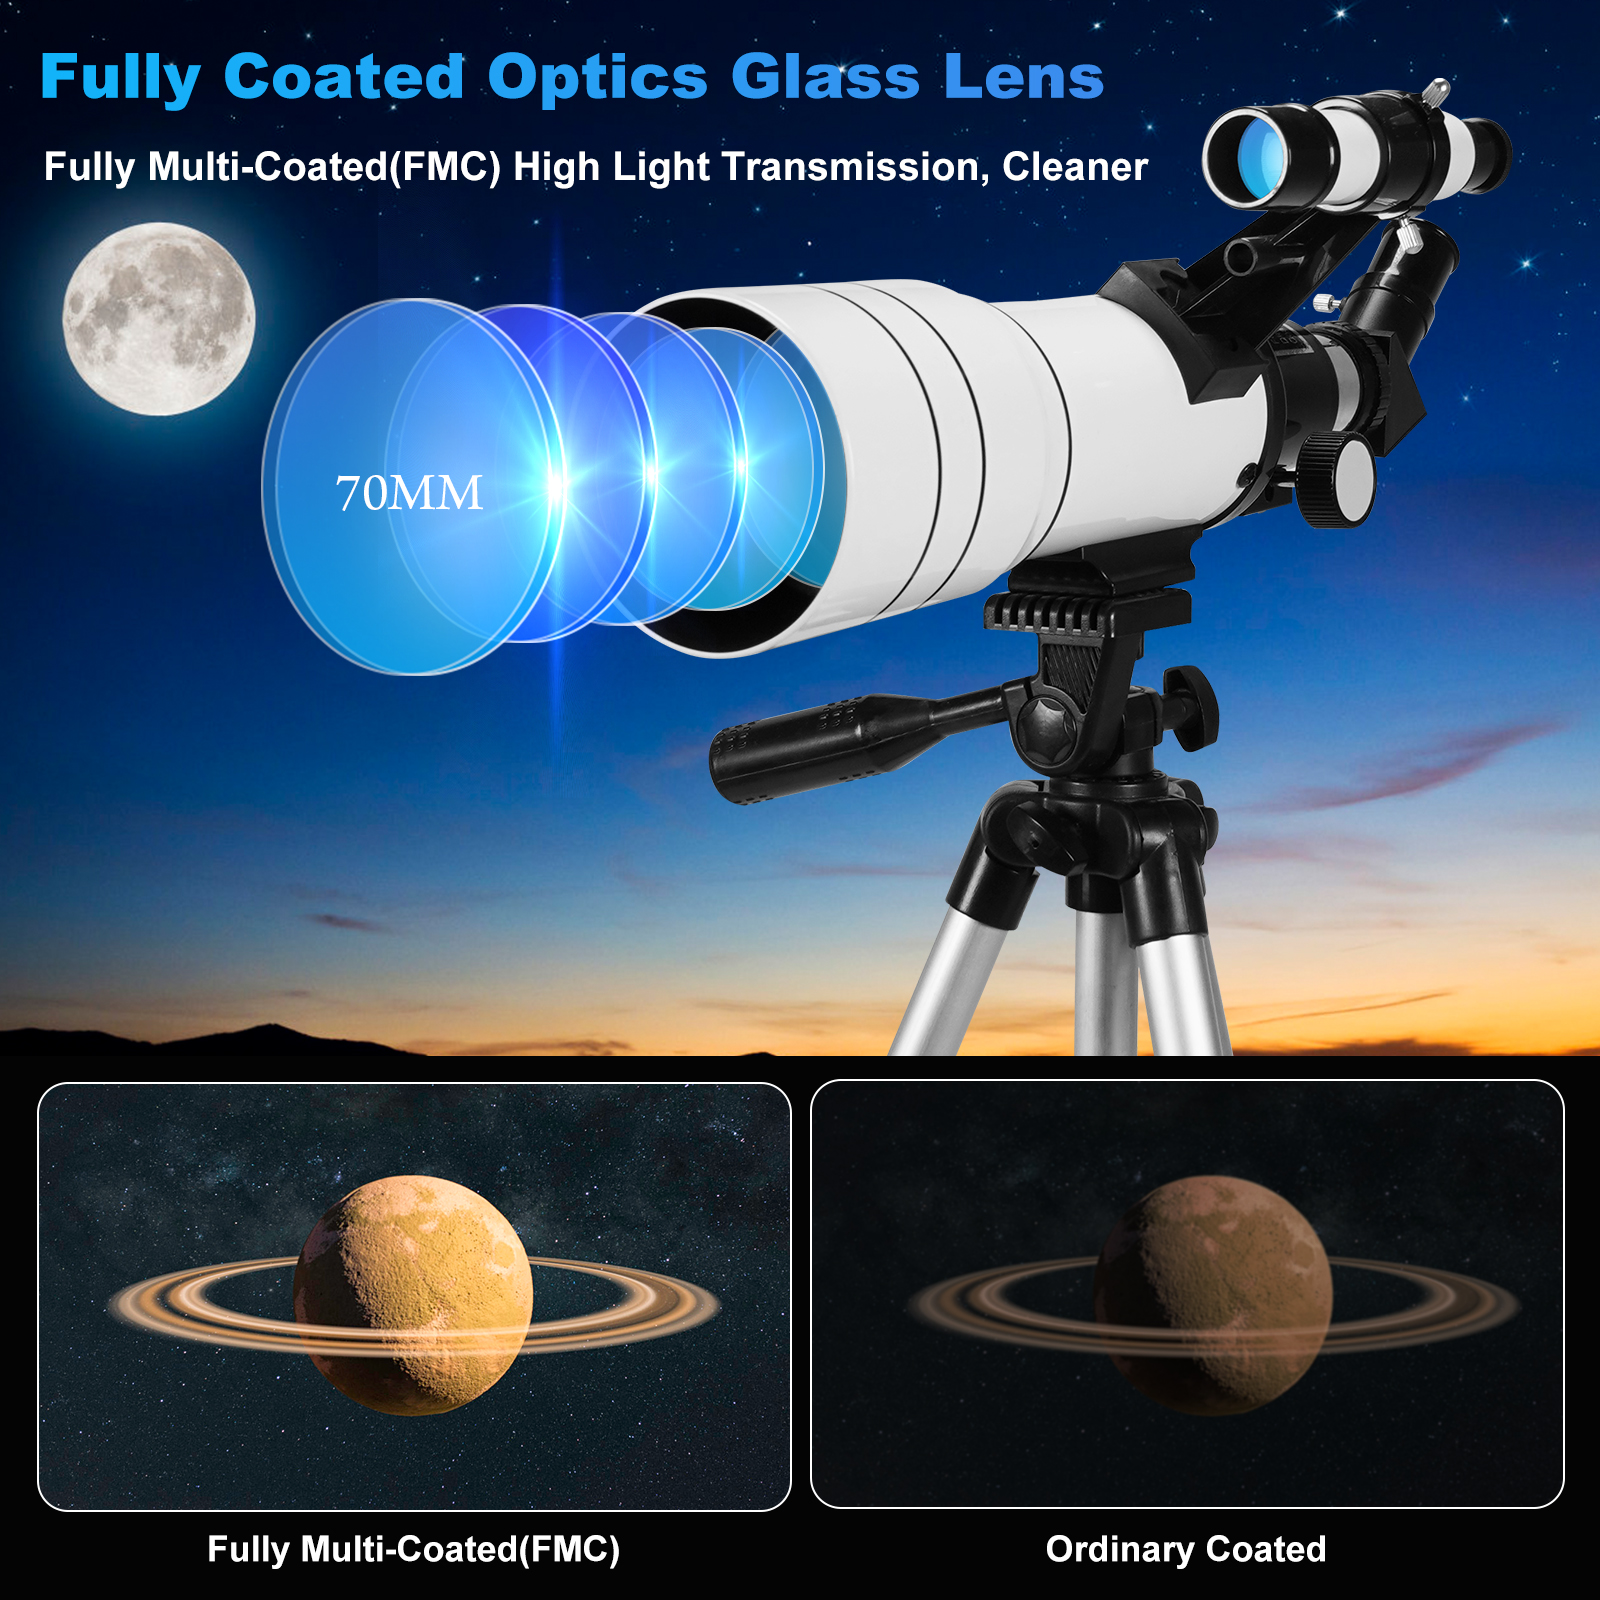 TOPVISION Telescope, 70mm Telescopes for Adults & Kids, 300mm Portable Refractor Telescope (15X-150X) with a Phone Adapter & Adjustable Tripod for Astronomy Beginners, Gift for Kids - image 3 of 10